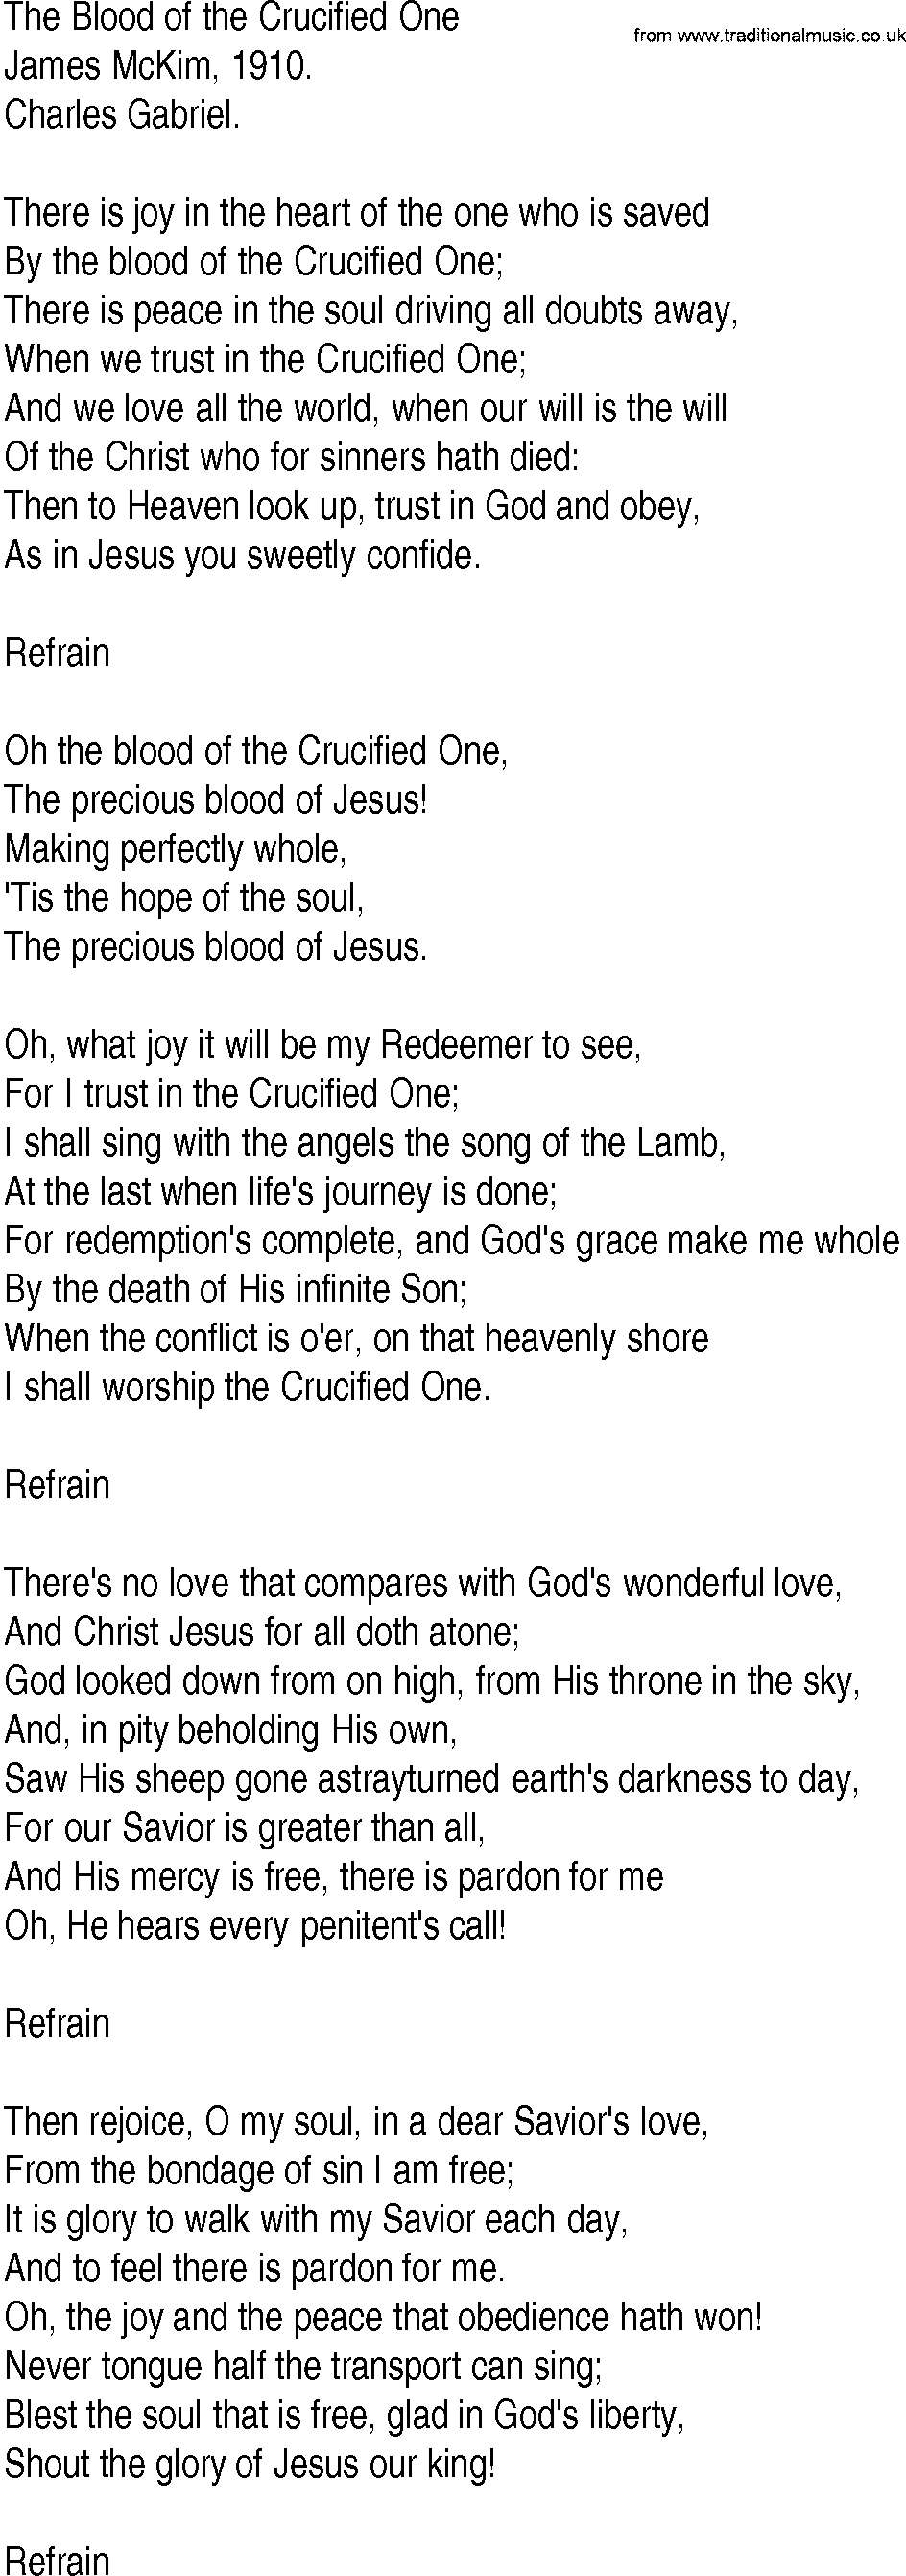 Hymn and Gospel Song: The Blood of the Crucified One by James McKim lyrics